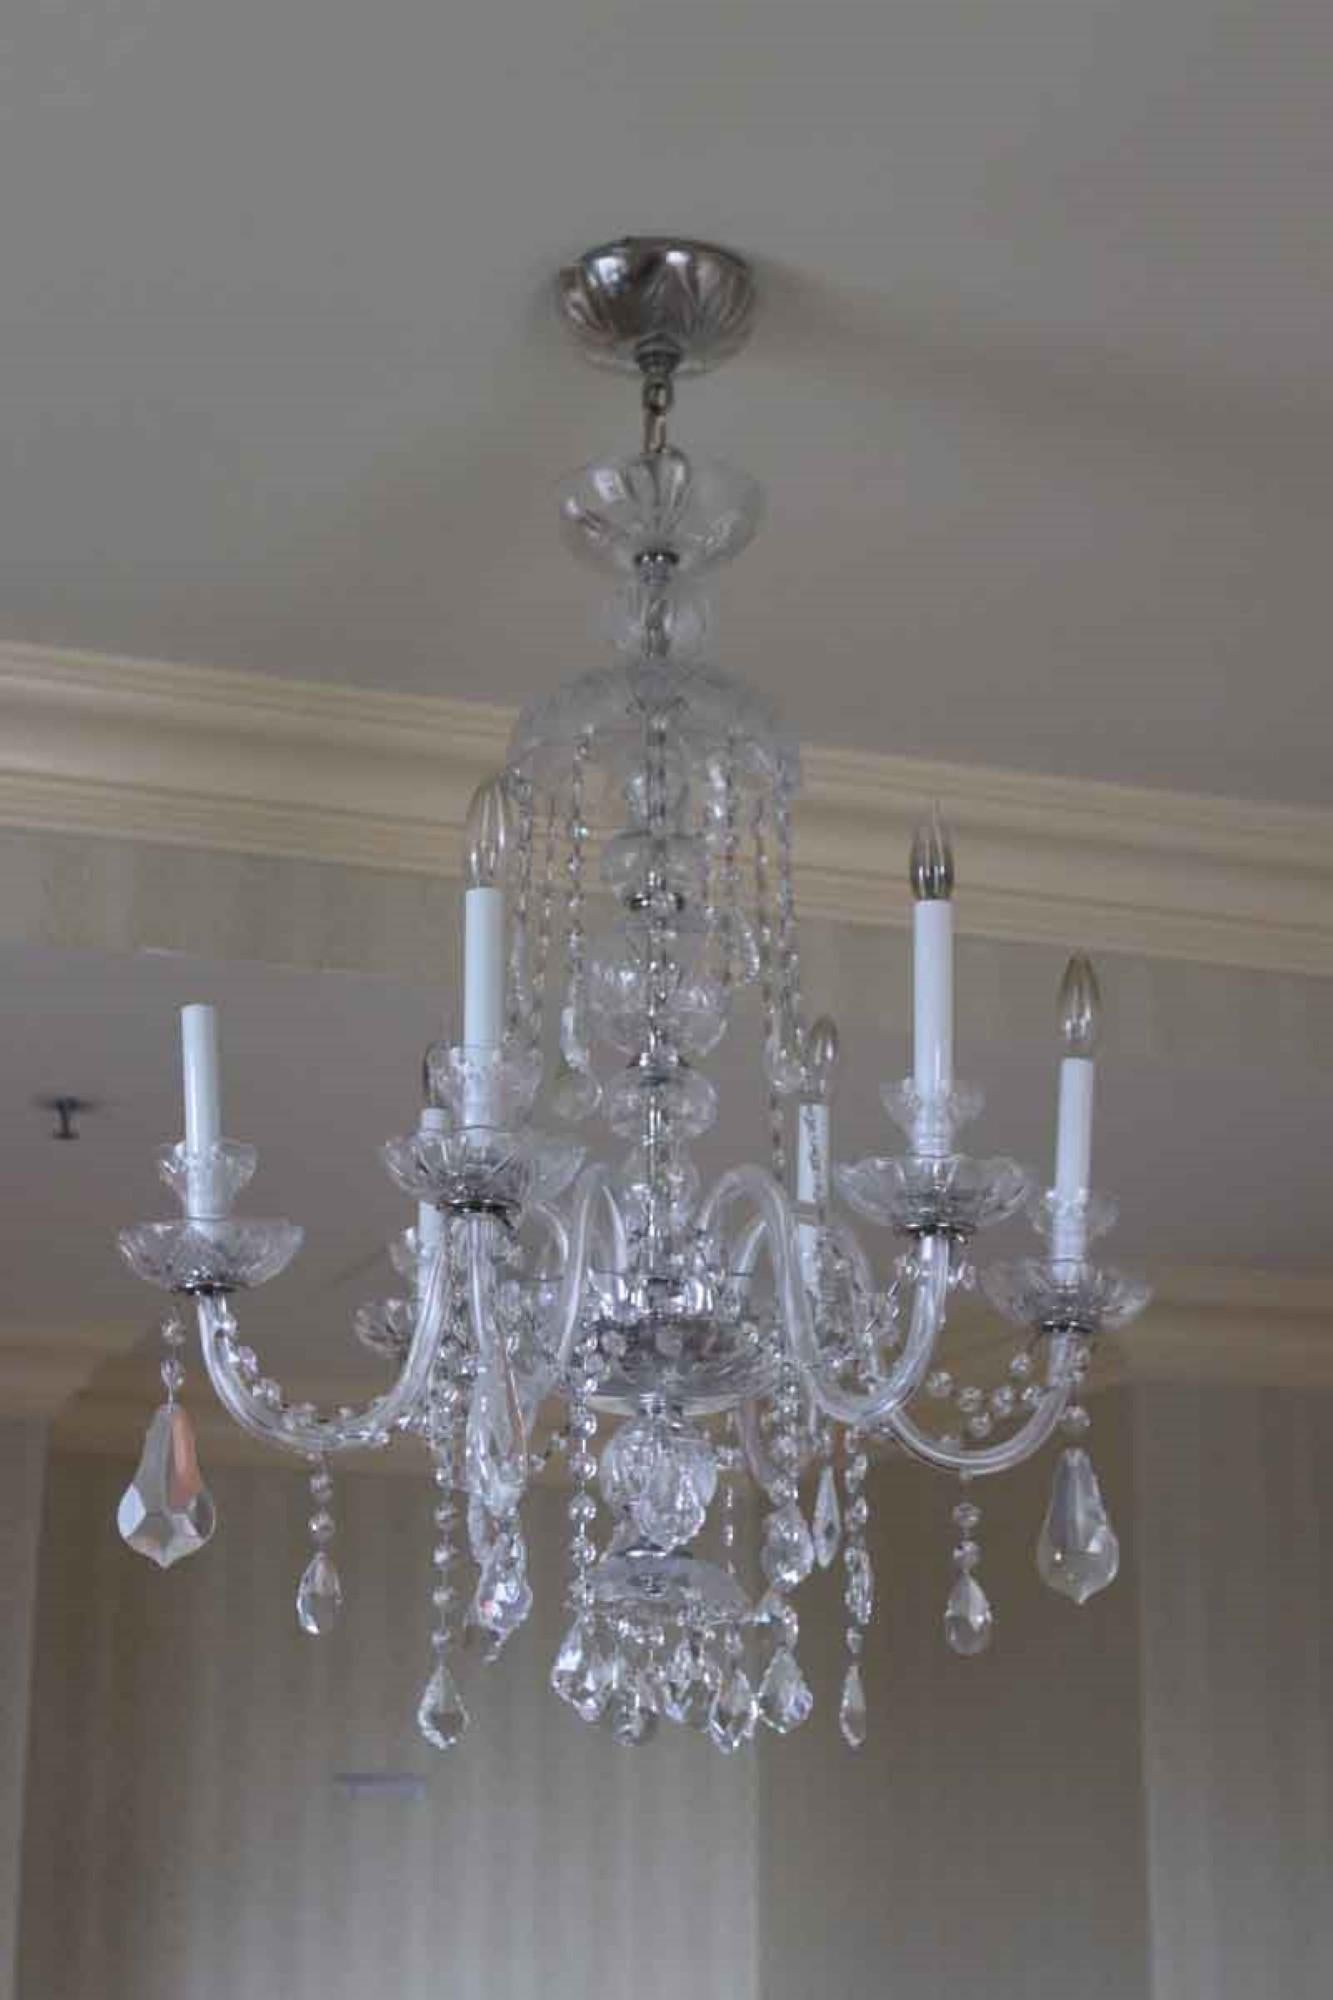 1980s six arm crystal chandelier with nickel and etched glass fittings. From the 1980s renovation of the famous NYC Waldorf Astoria Hotel. These lights adorned the corridors of the towers of the Waldorf Astoria Hotel. Waldorf Astoria authenticity